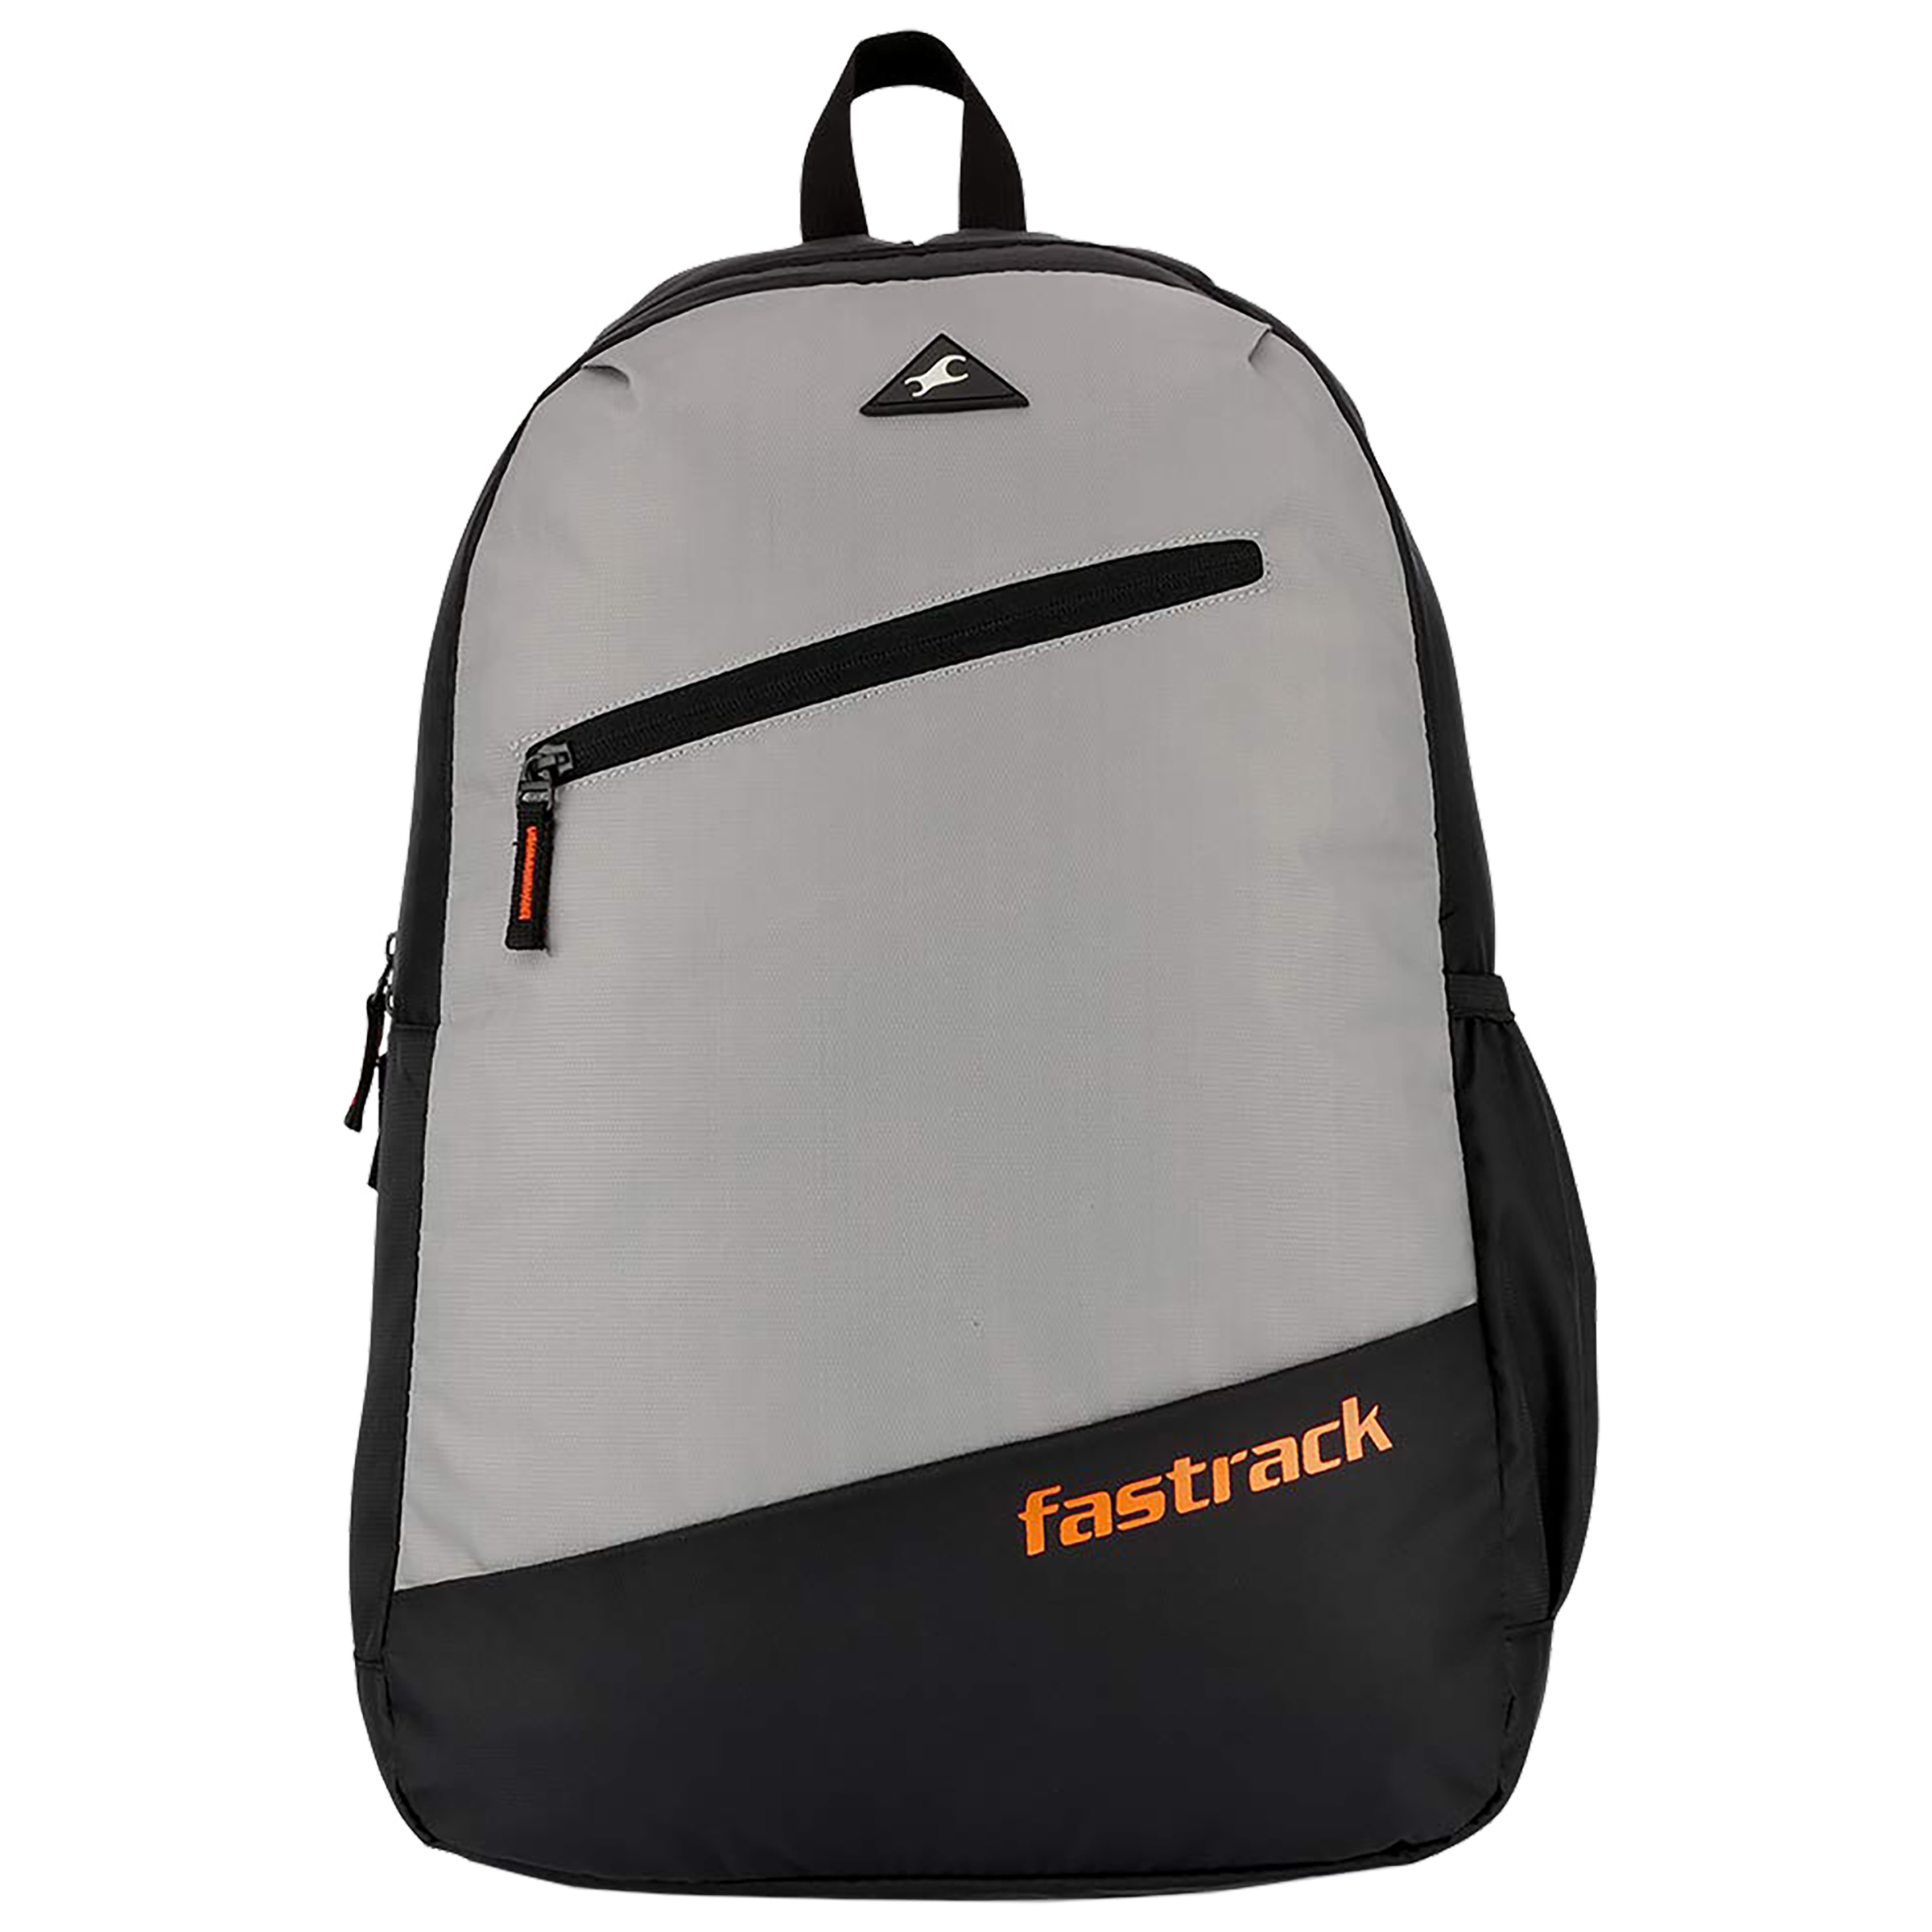 Fastrack - Fastrack 25 Litres Polyester Backpack for 16 Inch Laptop (Back Padding, A0809NGY01, Grey)